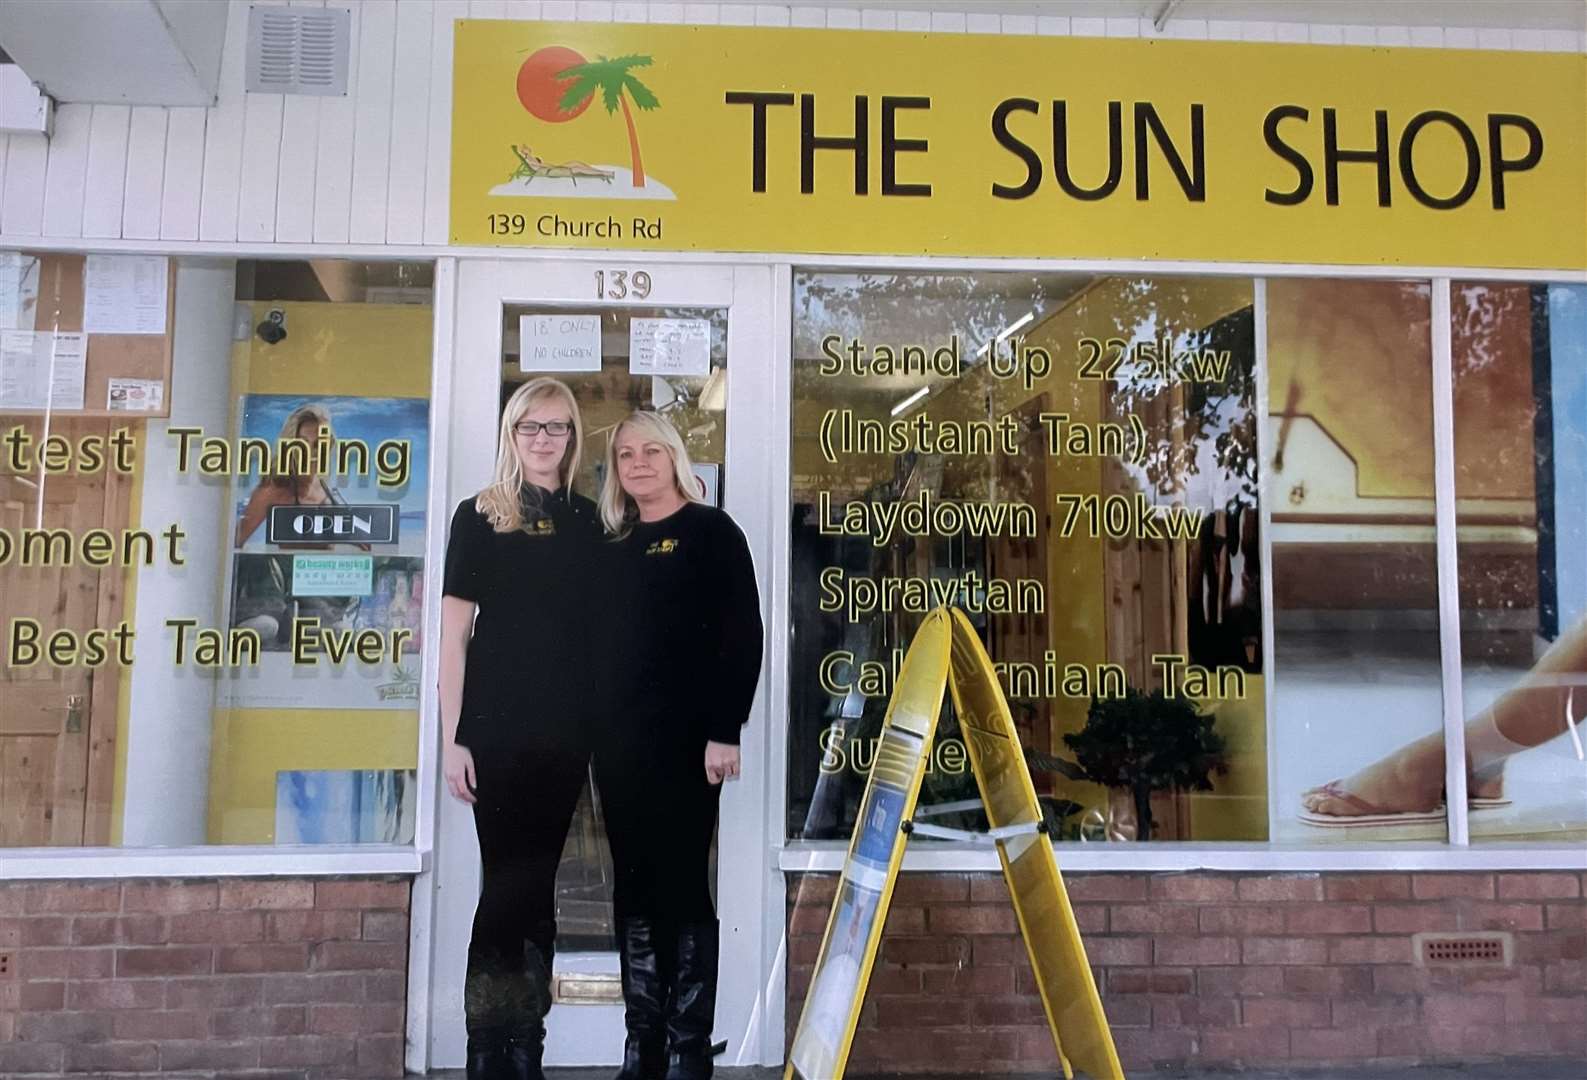 Kim ran the shop with her daughter Kayleigh. Picture: The Sun Shop